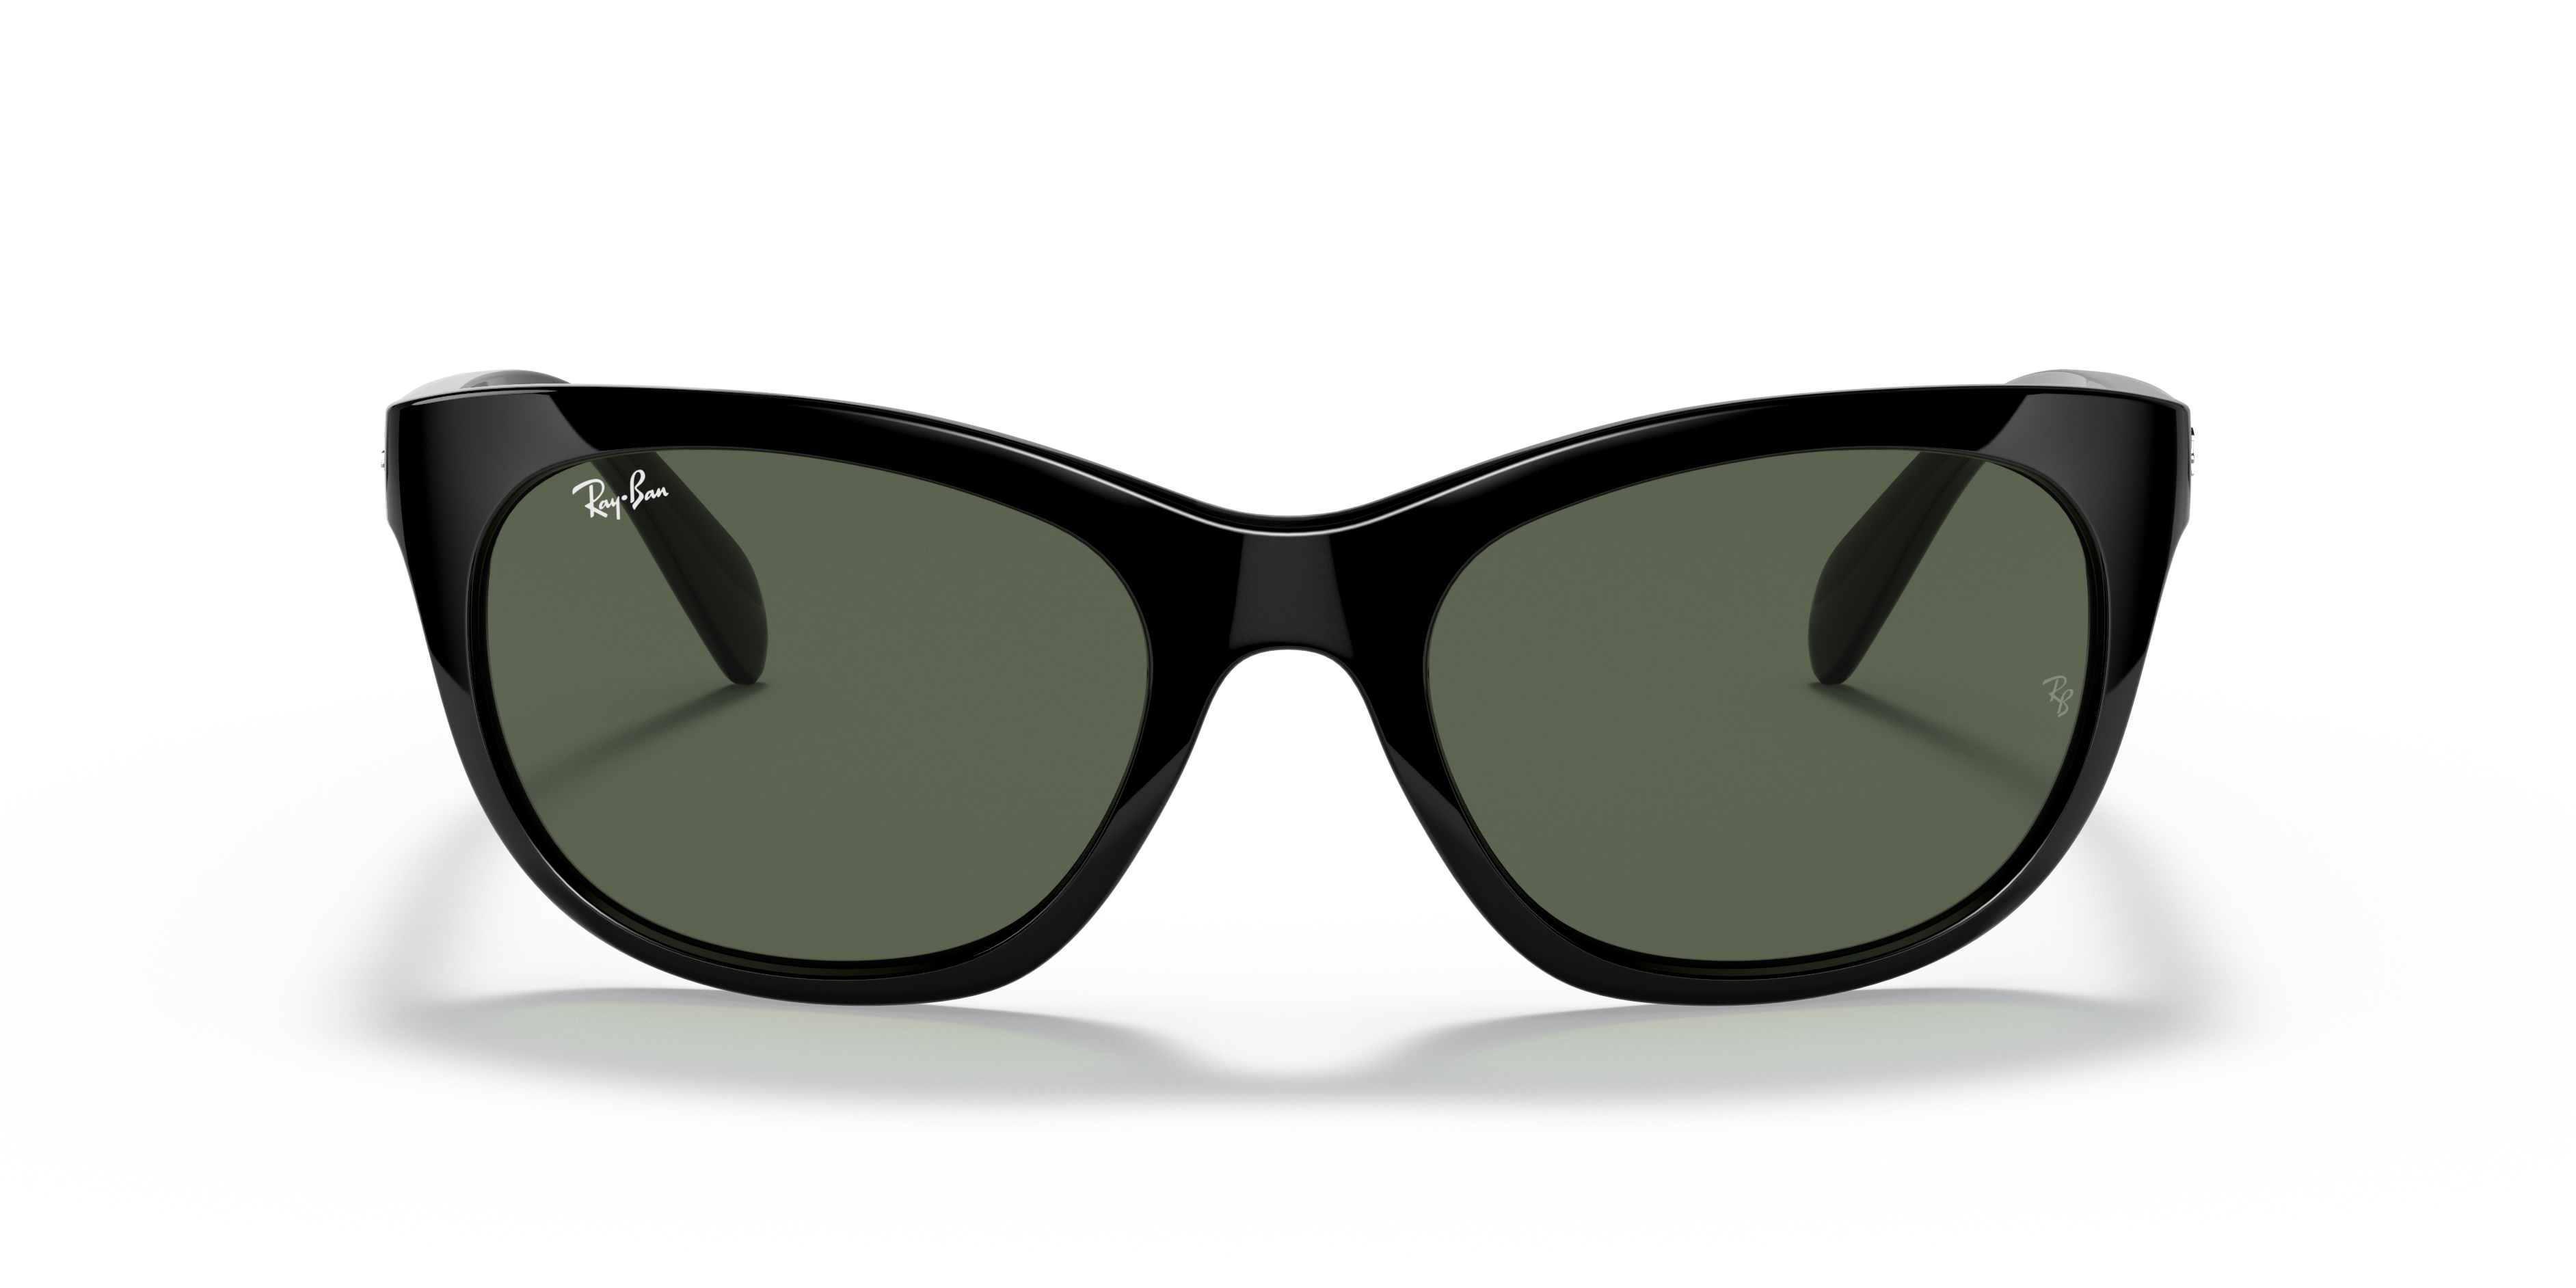 [products.image.front] Ray-Ban RB4216 601/71